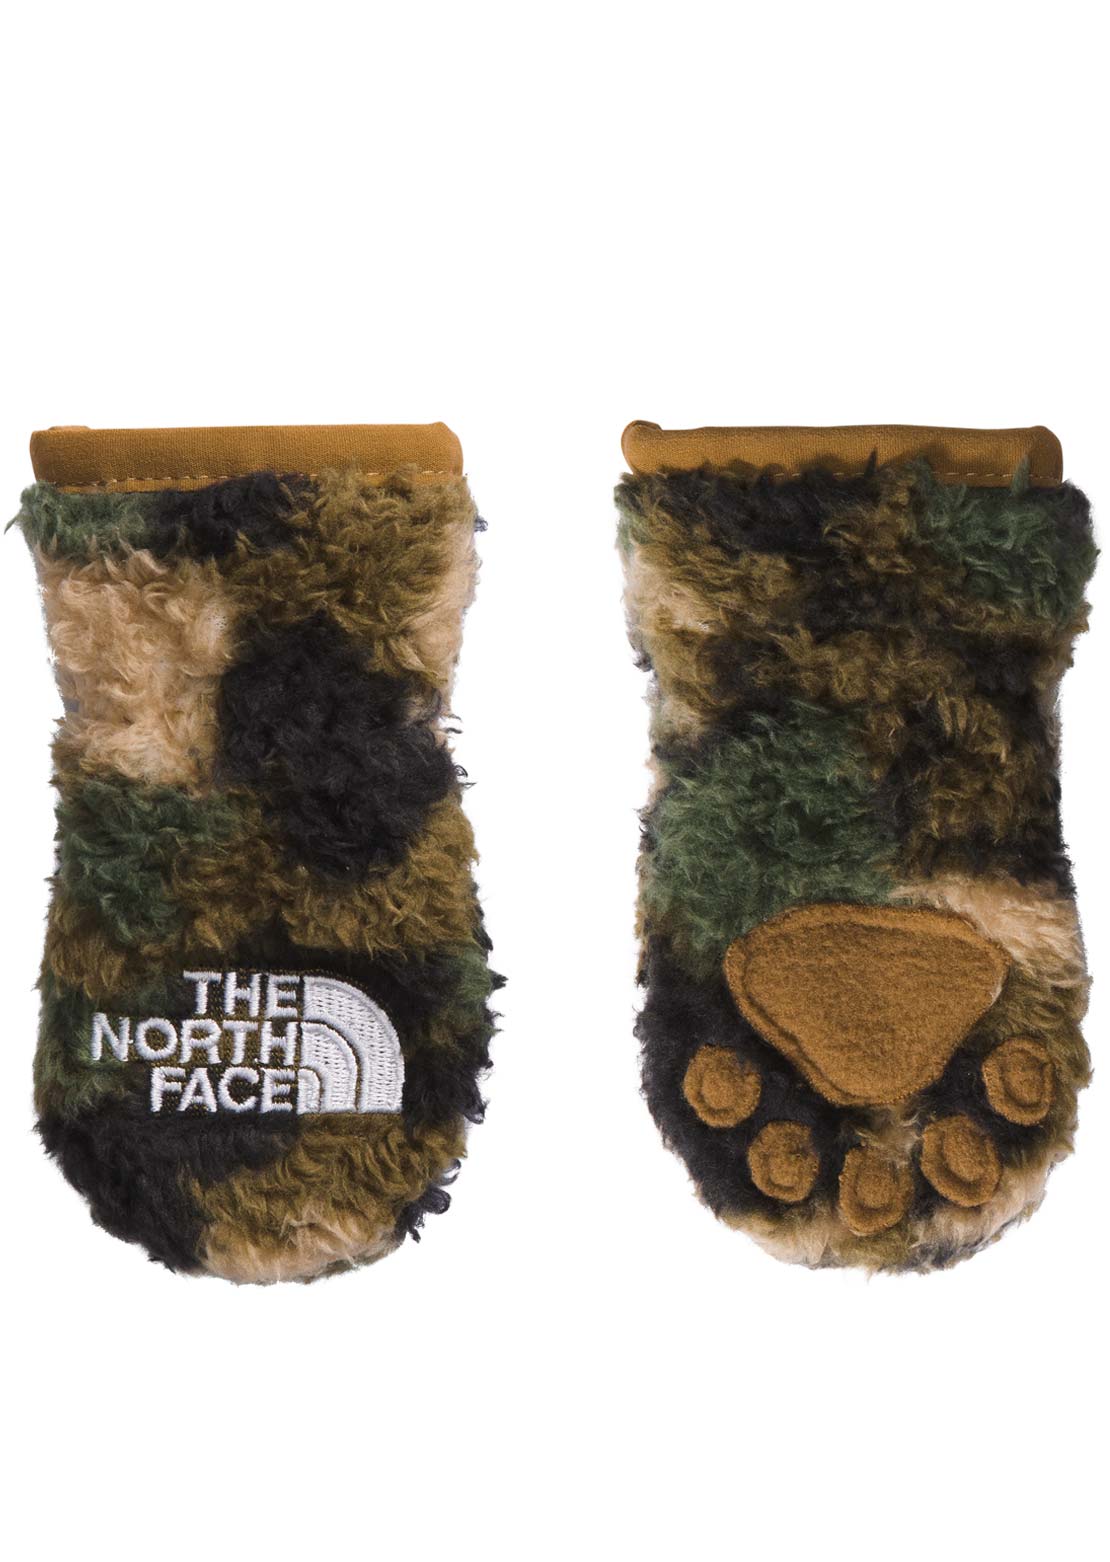 The North Face Infant Bear Suave Oso Mitt Military Olive Camo Texture Small Print